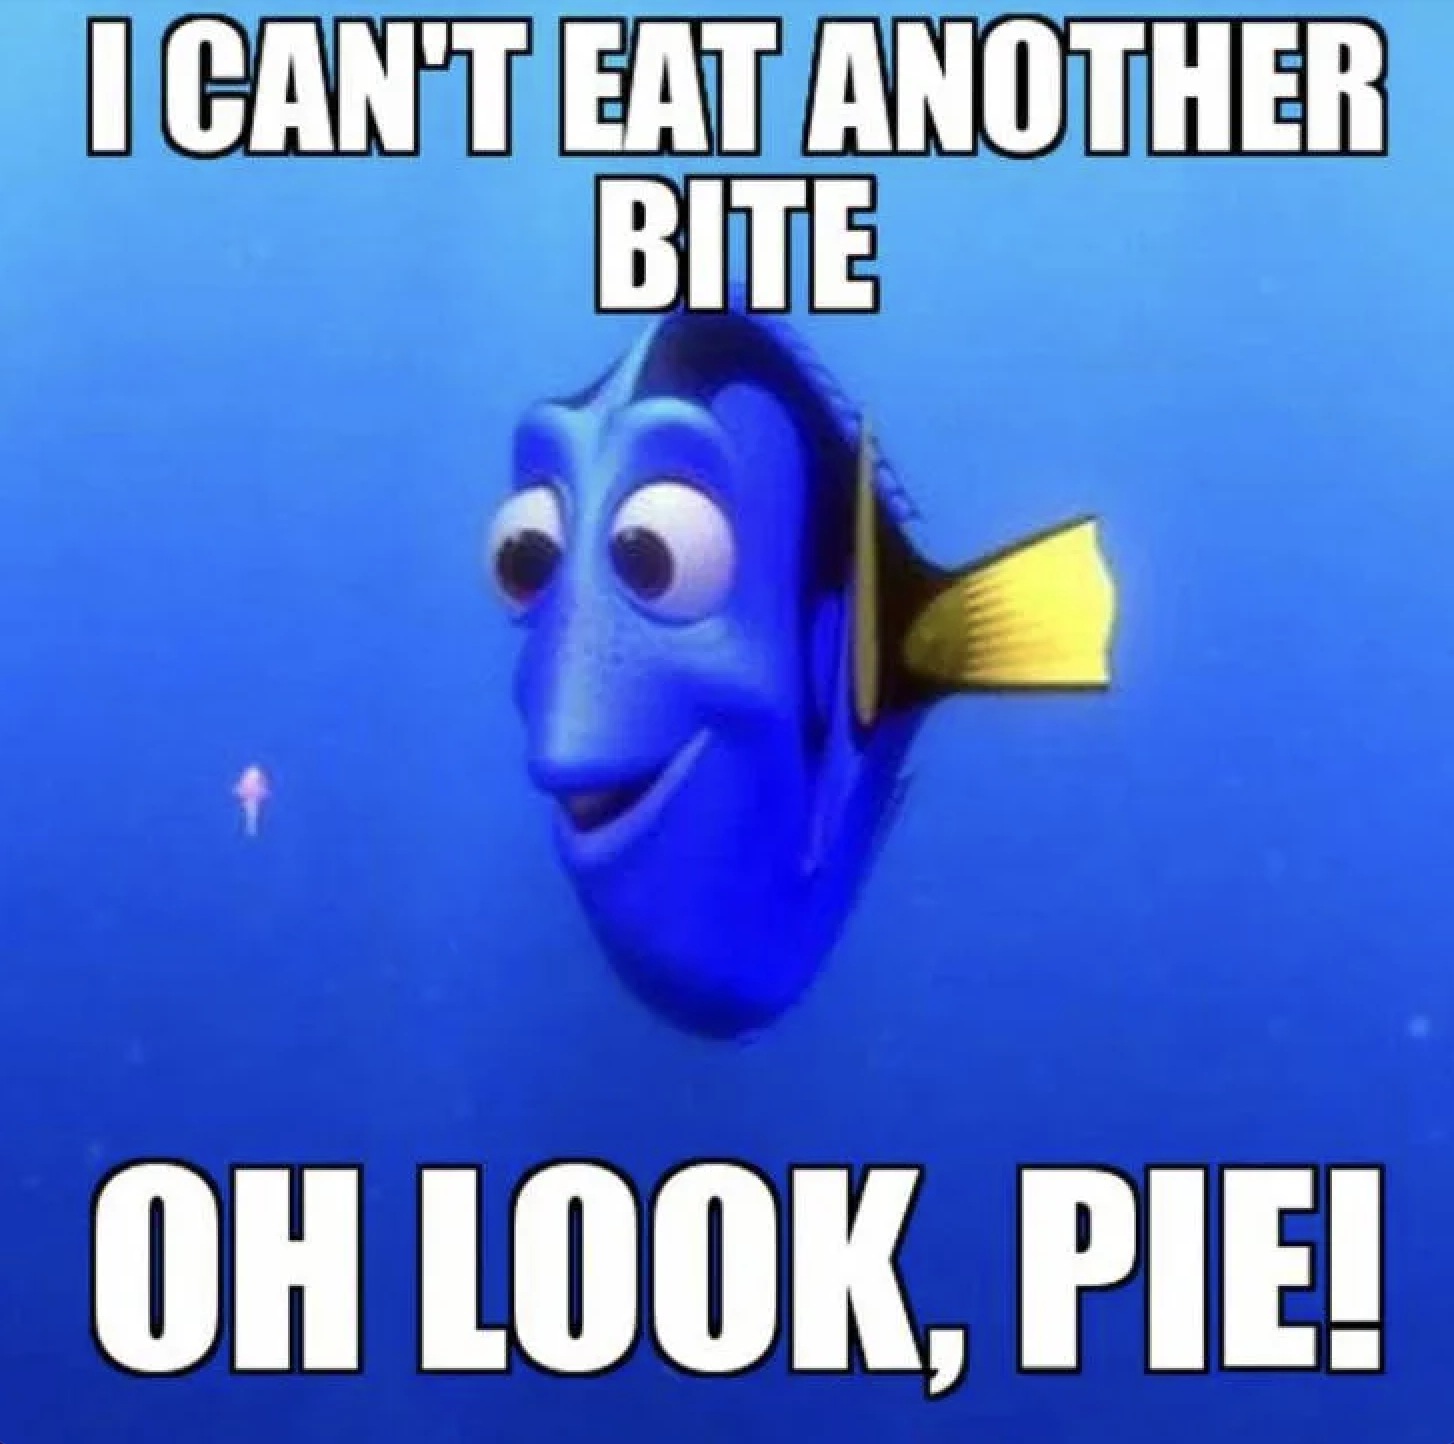 friendsgiving meme funny - I Can'T Eat Another Bite Oh Look, Pie!